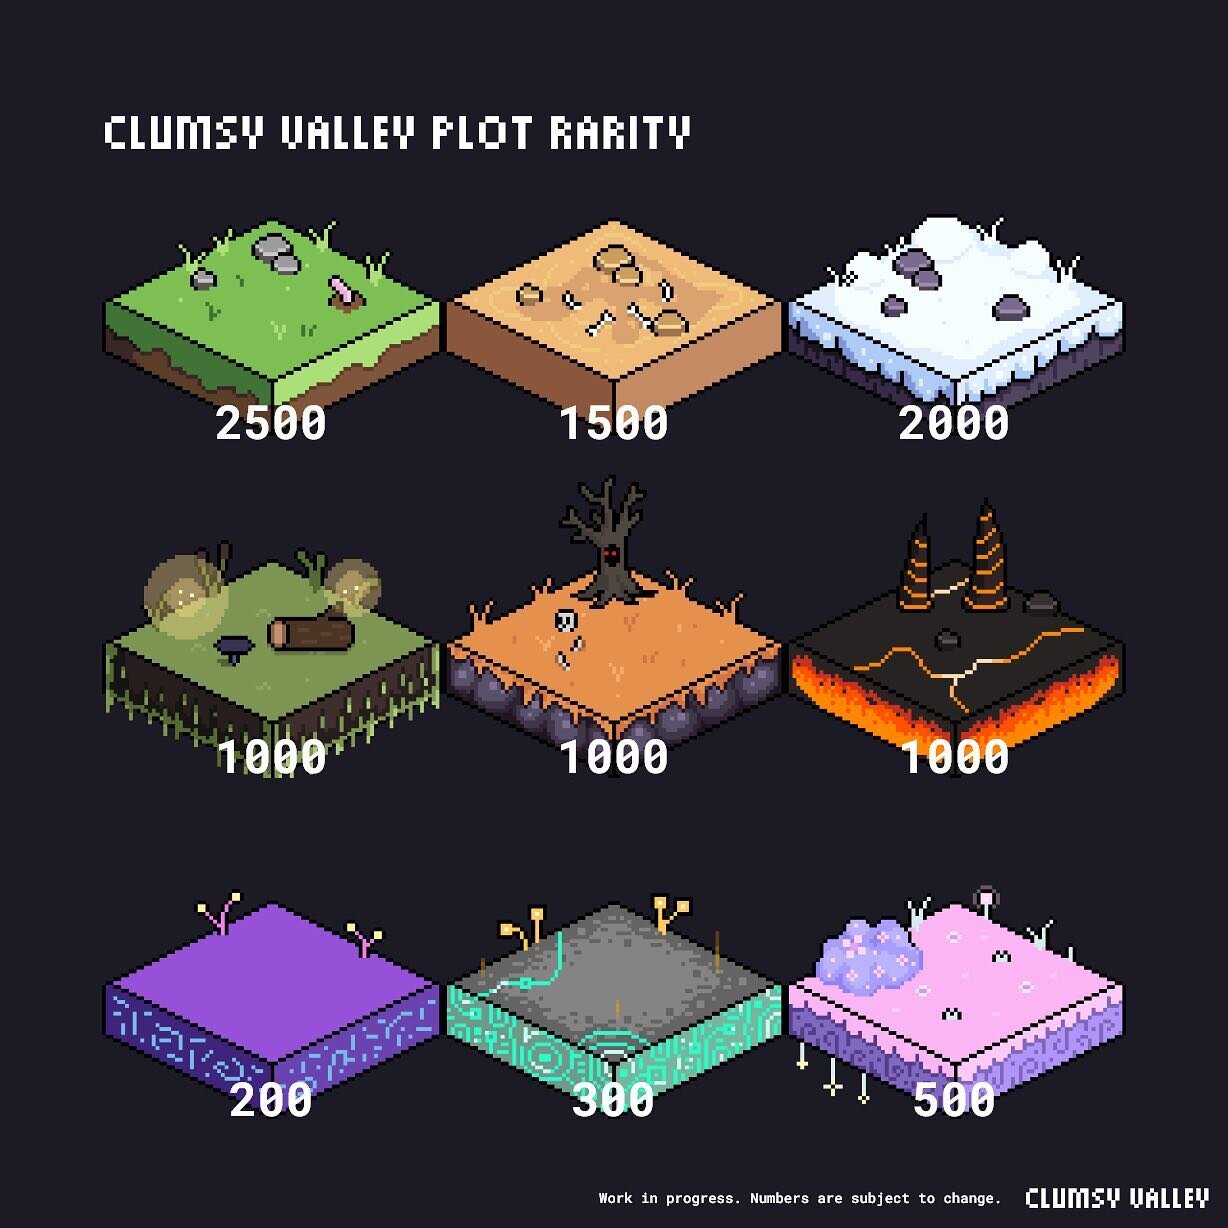 Plot Rarity and Loot Tables have been revealed! Learn more in our announcements channel in our discord #cnft #crypto #cardano